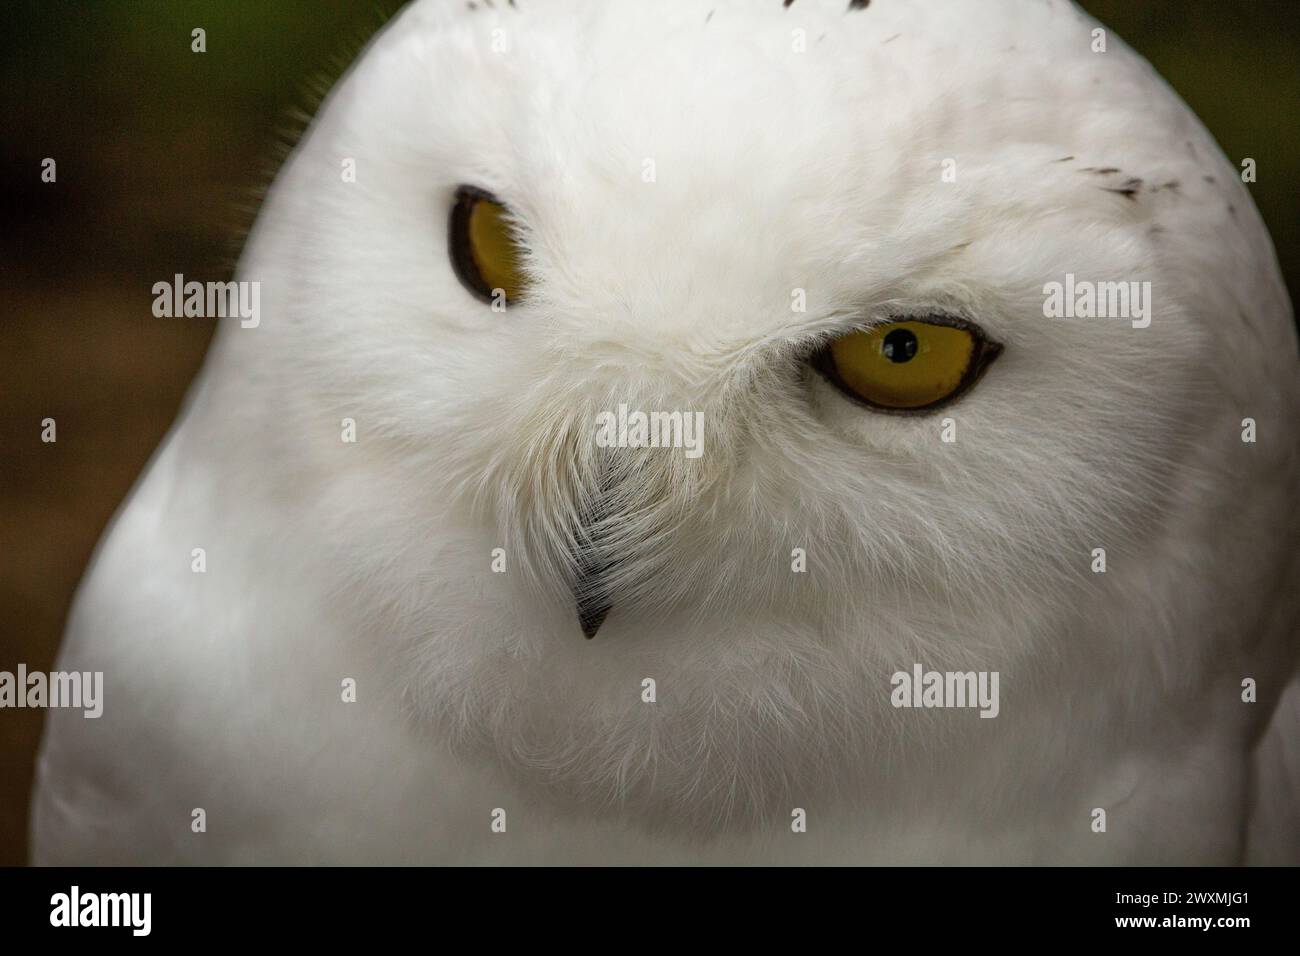 The Snowy Owl (Nyctea scandiaca) (Bubo scandiacus) is a large owl of the typical owl family Strigidae. Stock Photo